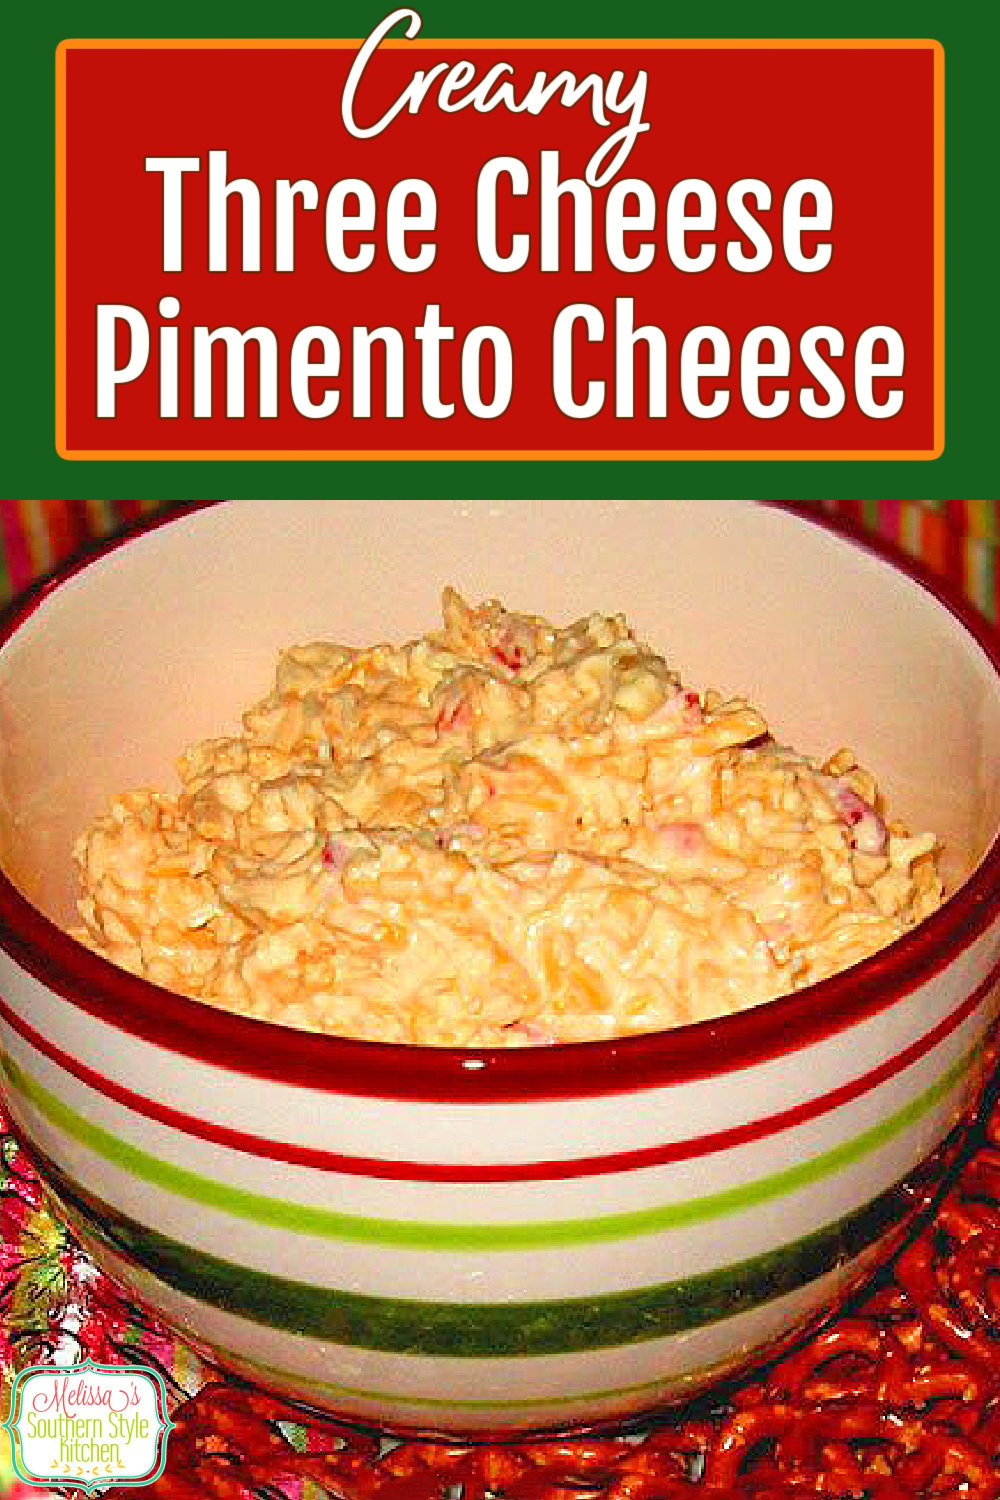 Slather this Creamy Three Cheese Pimento Cheese on celery, crackers, pretzels or bread for an appetizer and between meal snacking. #pimentocheese #southernpimentocheese #pimientocheeserecipes #easyrecipes #southernrecipes via @melissasssk